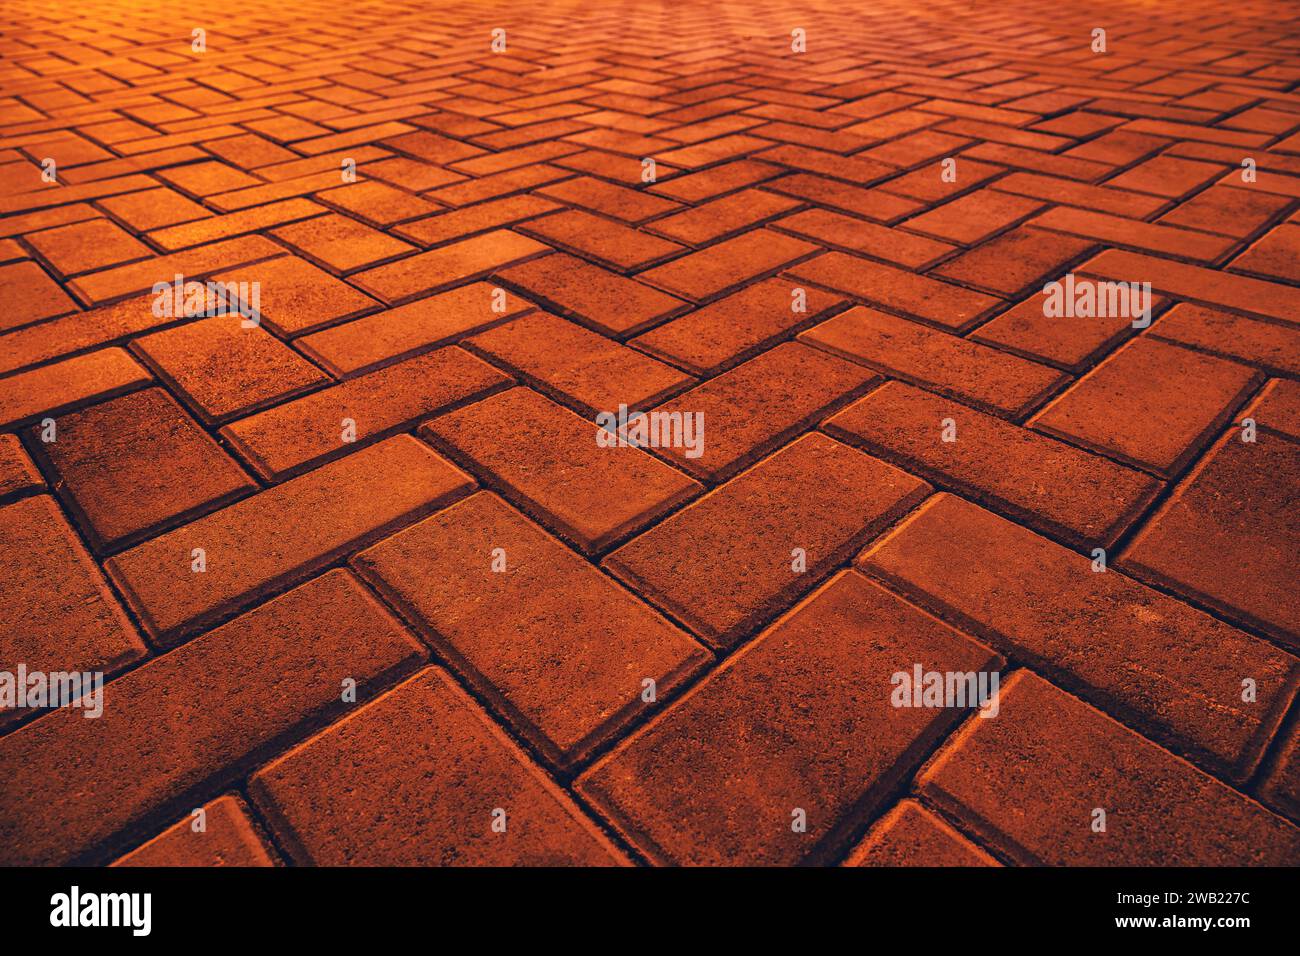 Texture of orange brick pavement in perspective as background. Selective focus. Stock Photo